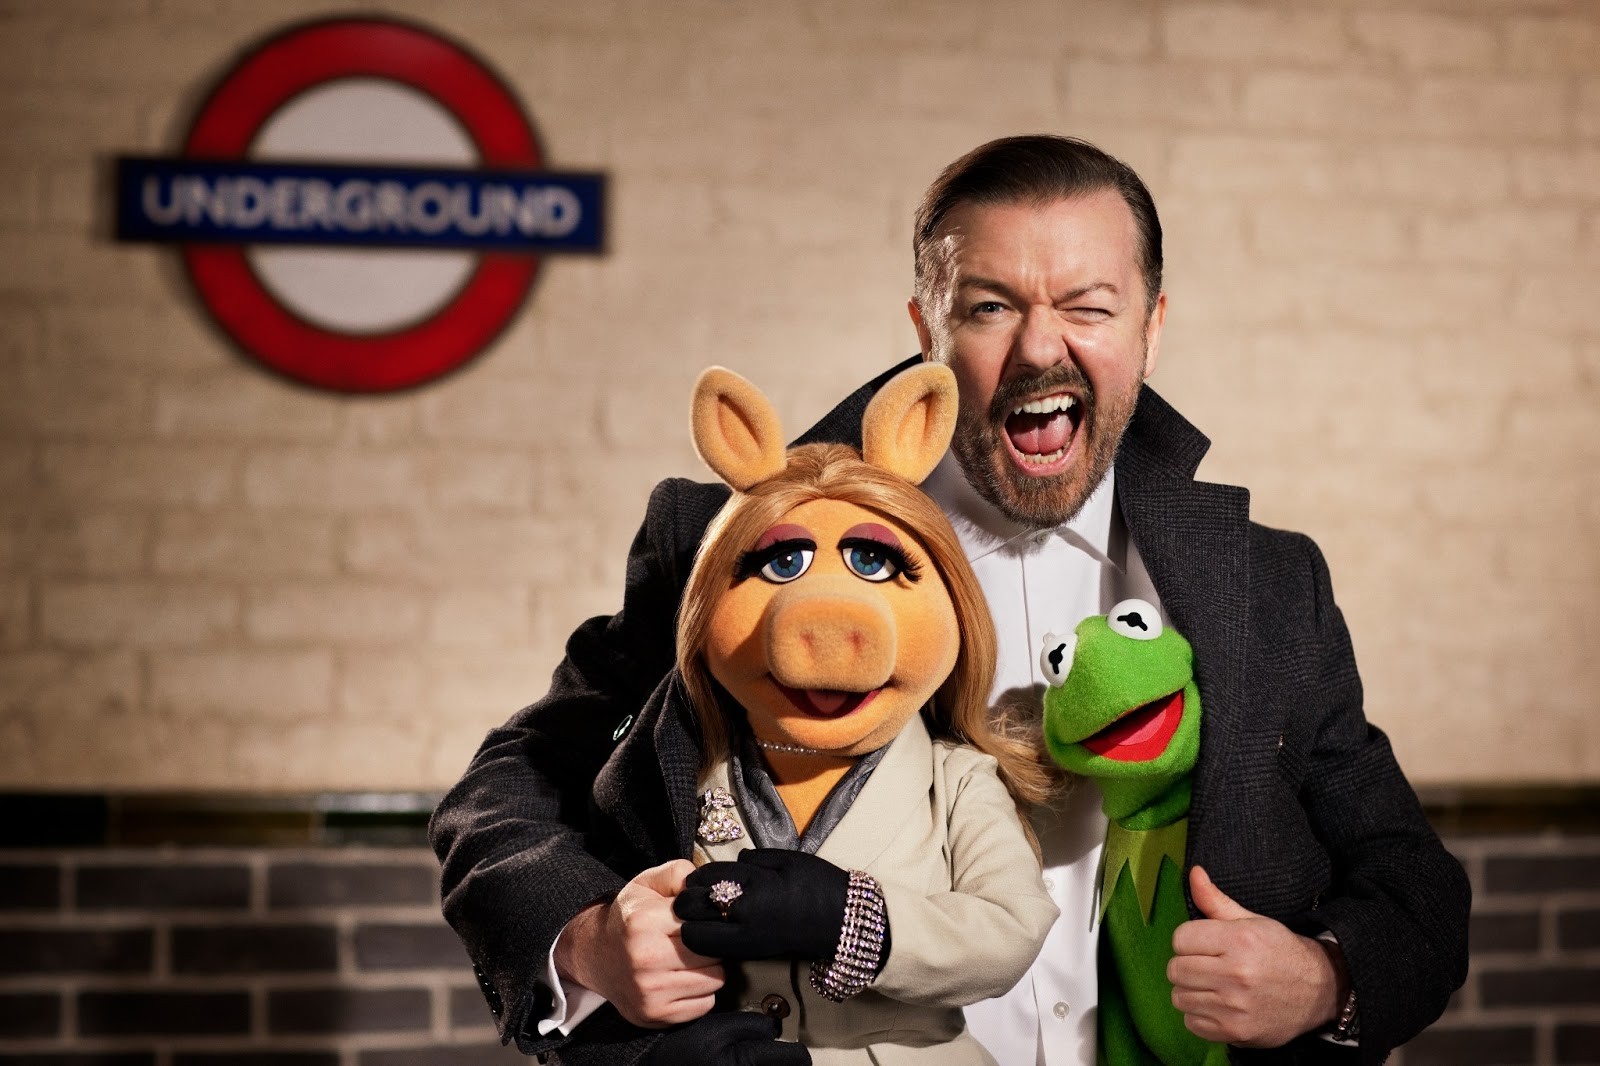 Miss Piggy, Ricky Gervais and Kermit the Frog in Walt Disney Pictures' Muppets Most Wanted (2014)